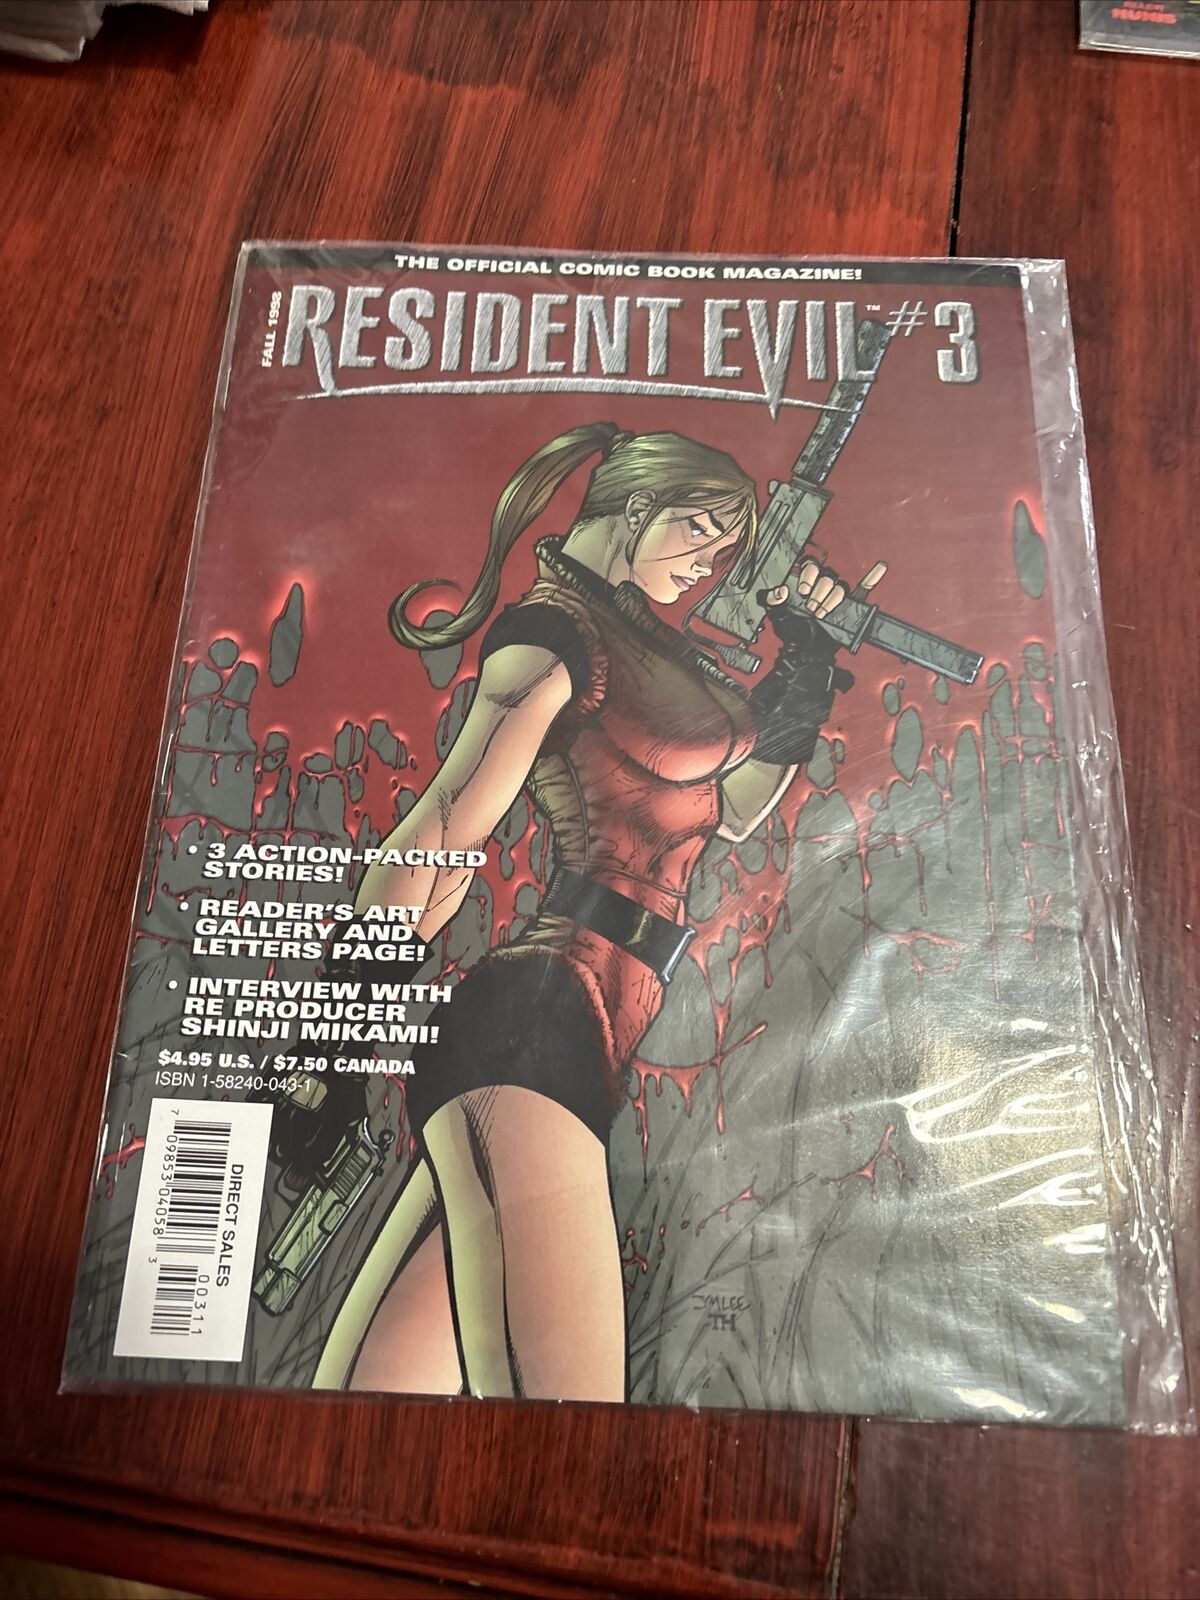 Resident Evil #3 Official Comic Book Magazine Fall 1998 Wildstorm